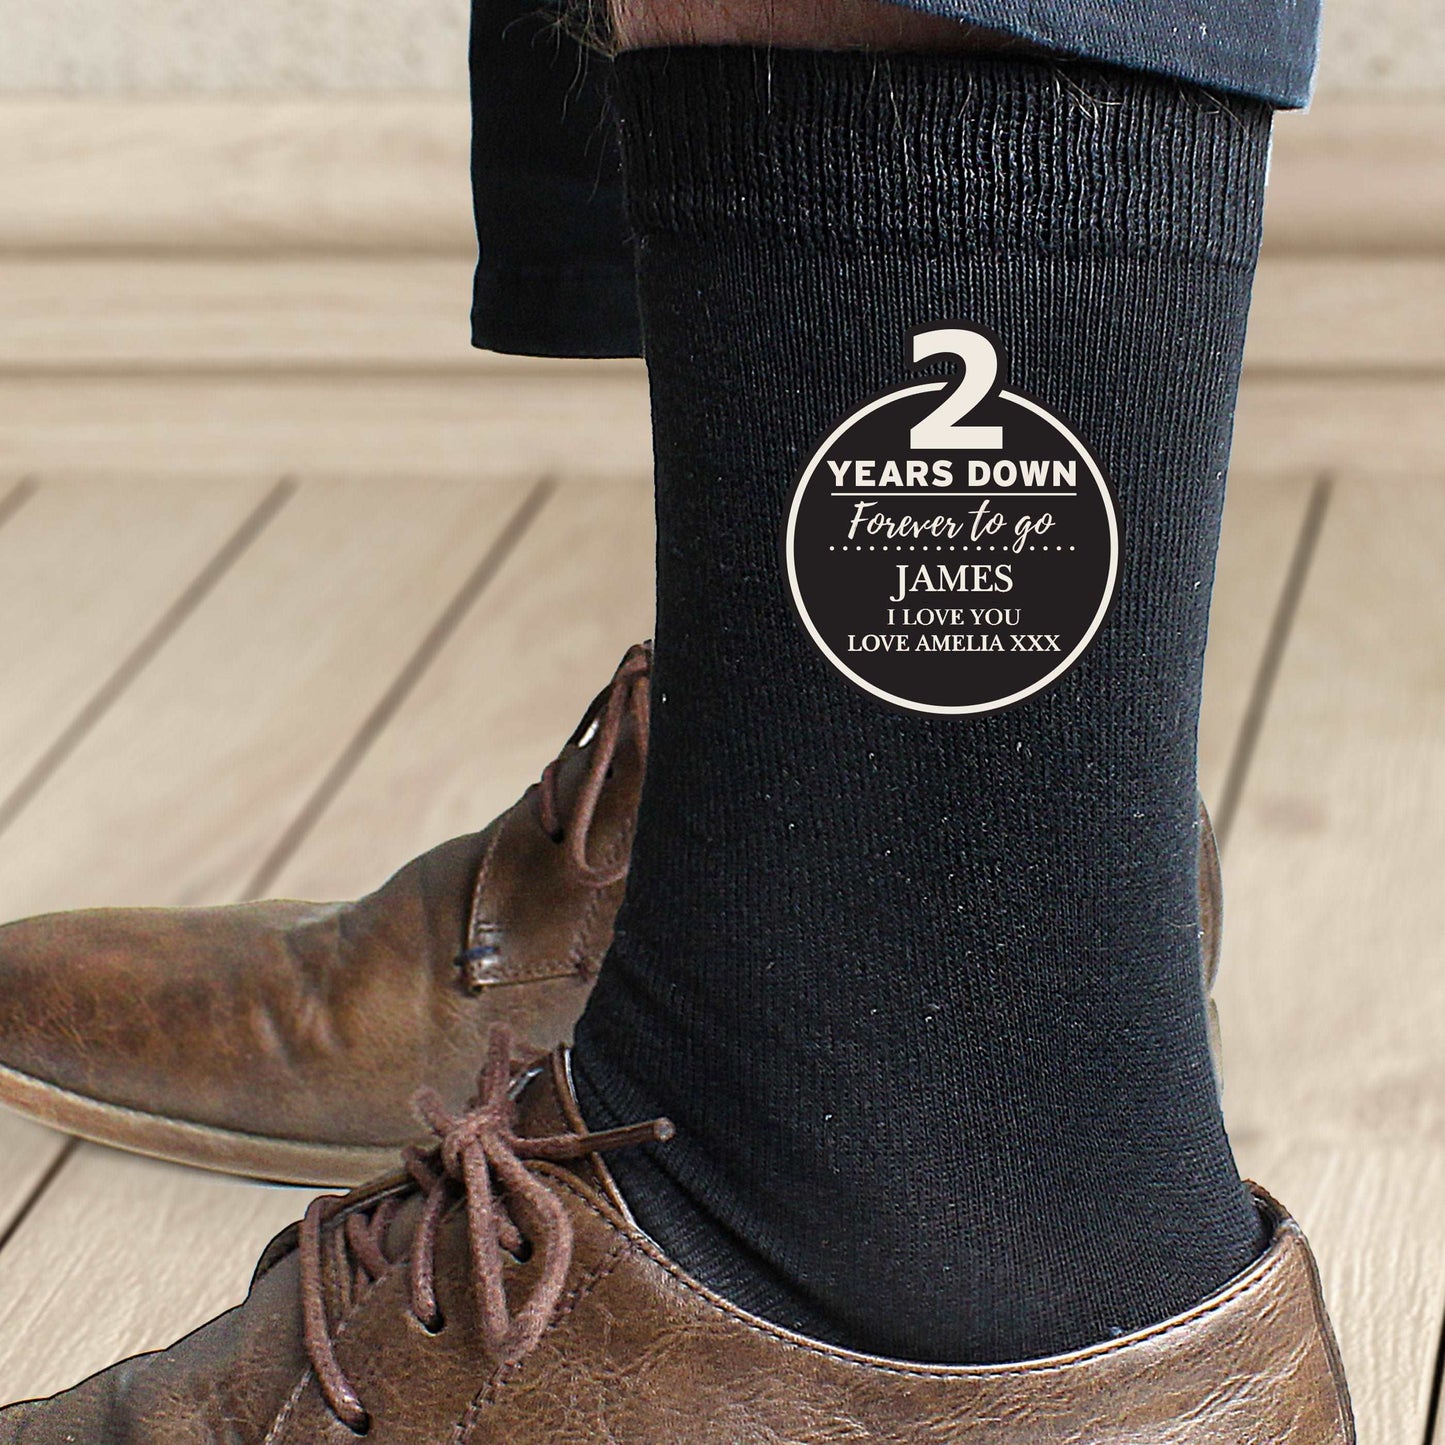 Black cotton blend Men's 2nd anniversary socks socks personalised with 2 years down forever to go and personalised with a name and message in white text By Sweetlea Gifts